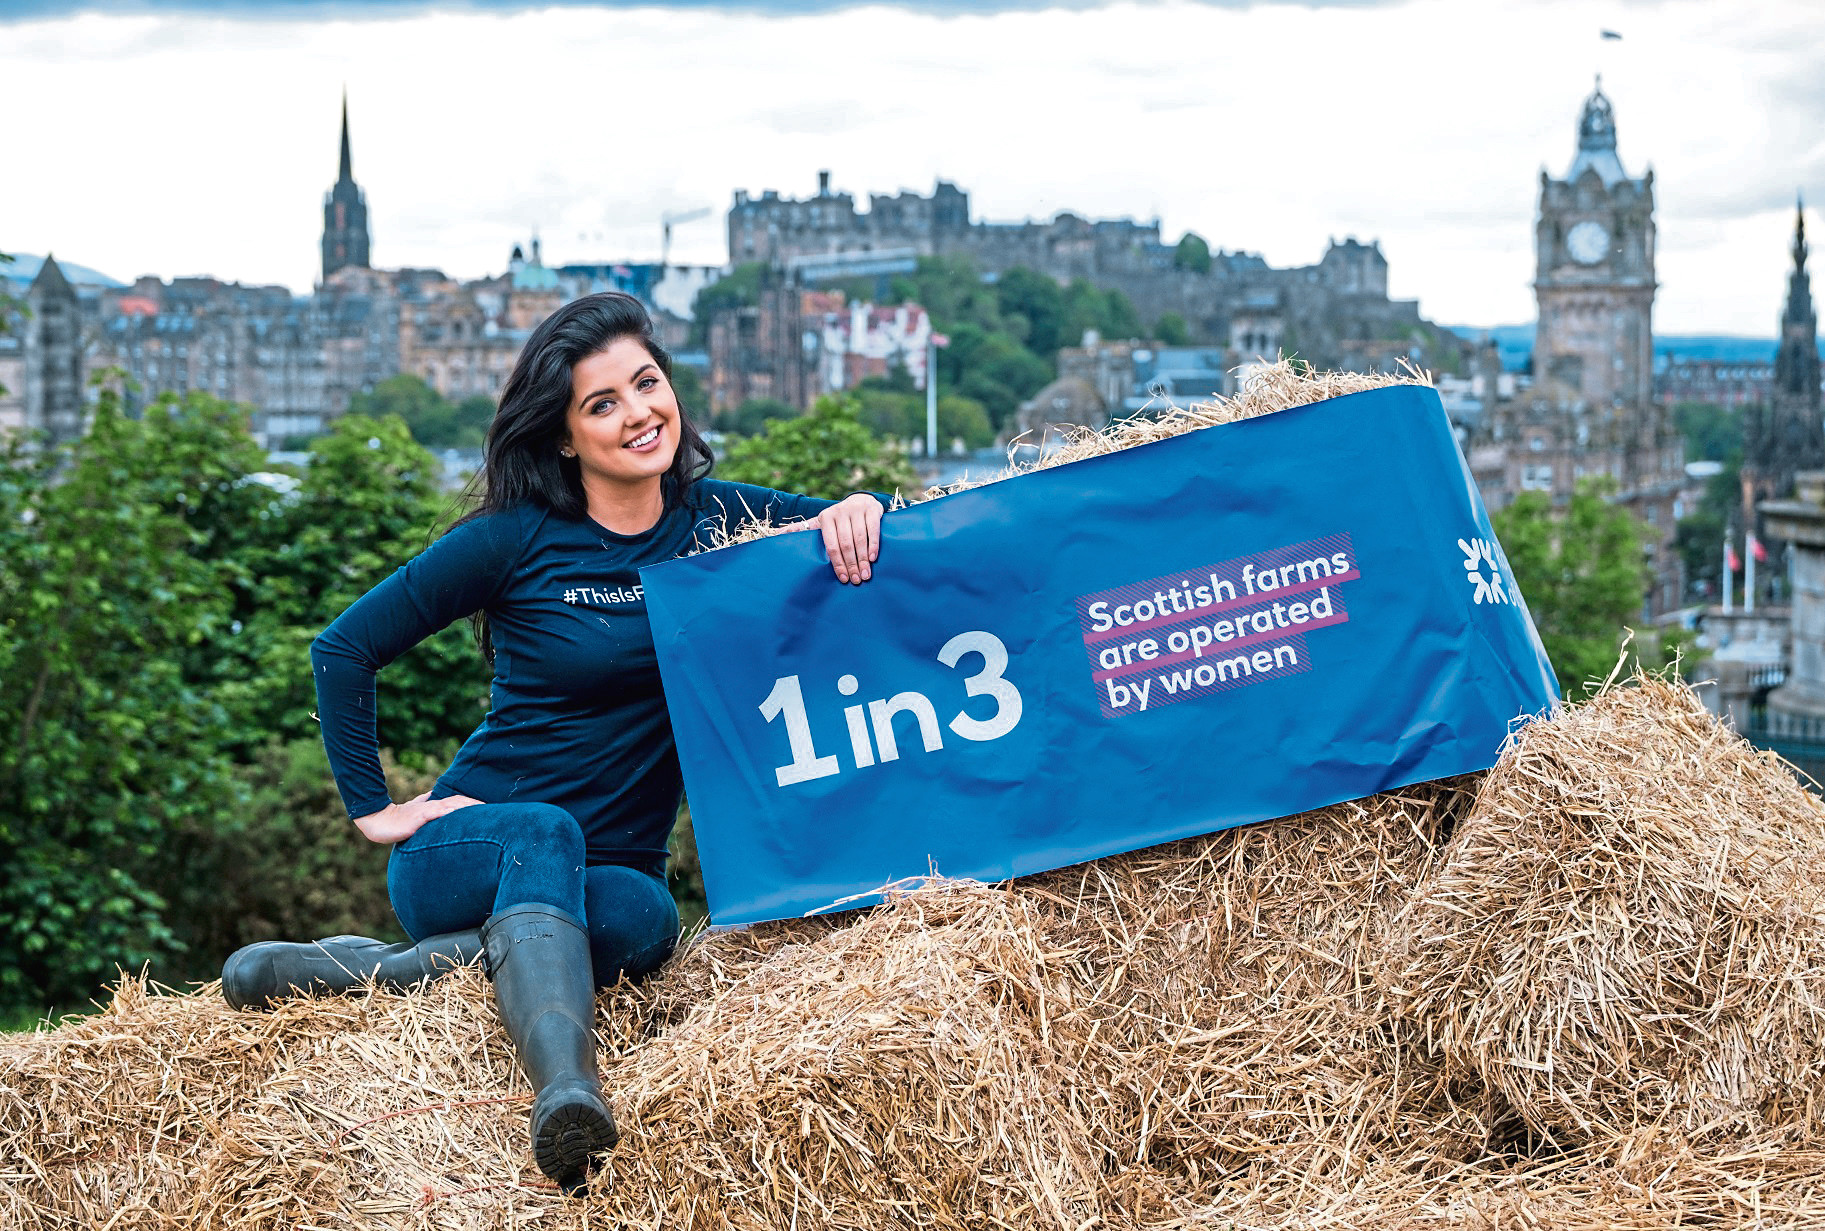 Storm Huntley was in Edinburgh promoting the RBS campaign.